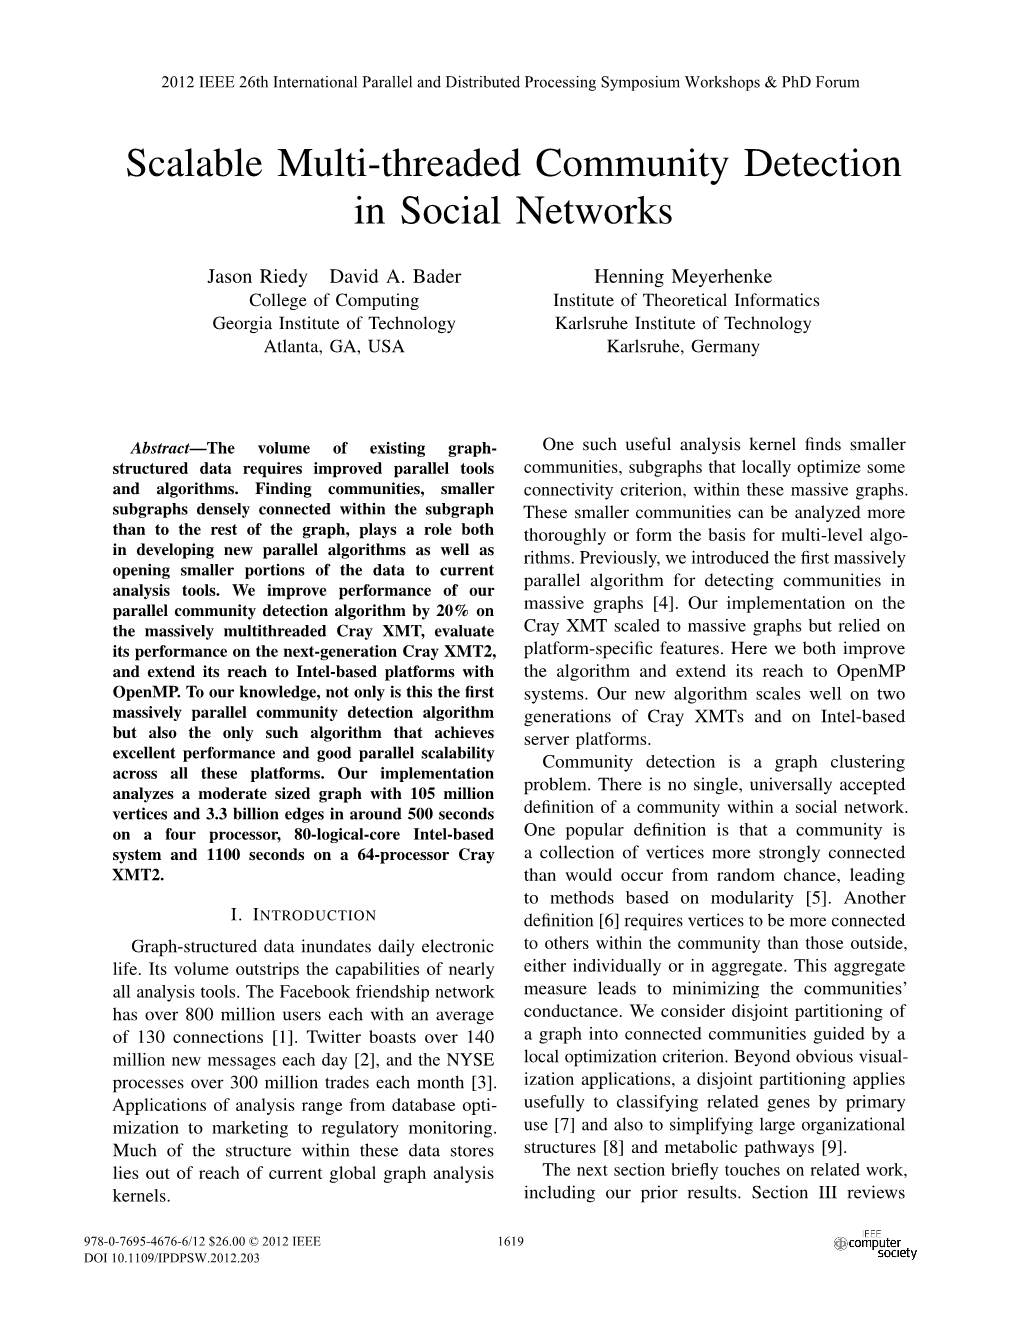 Scalable Multi-Threaded Community Detection in Social Networks